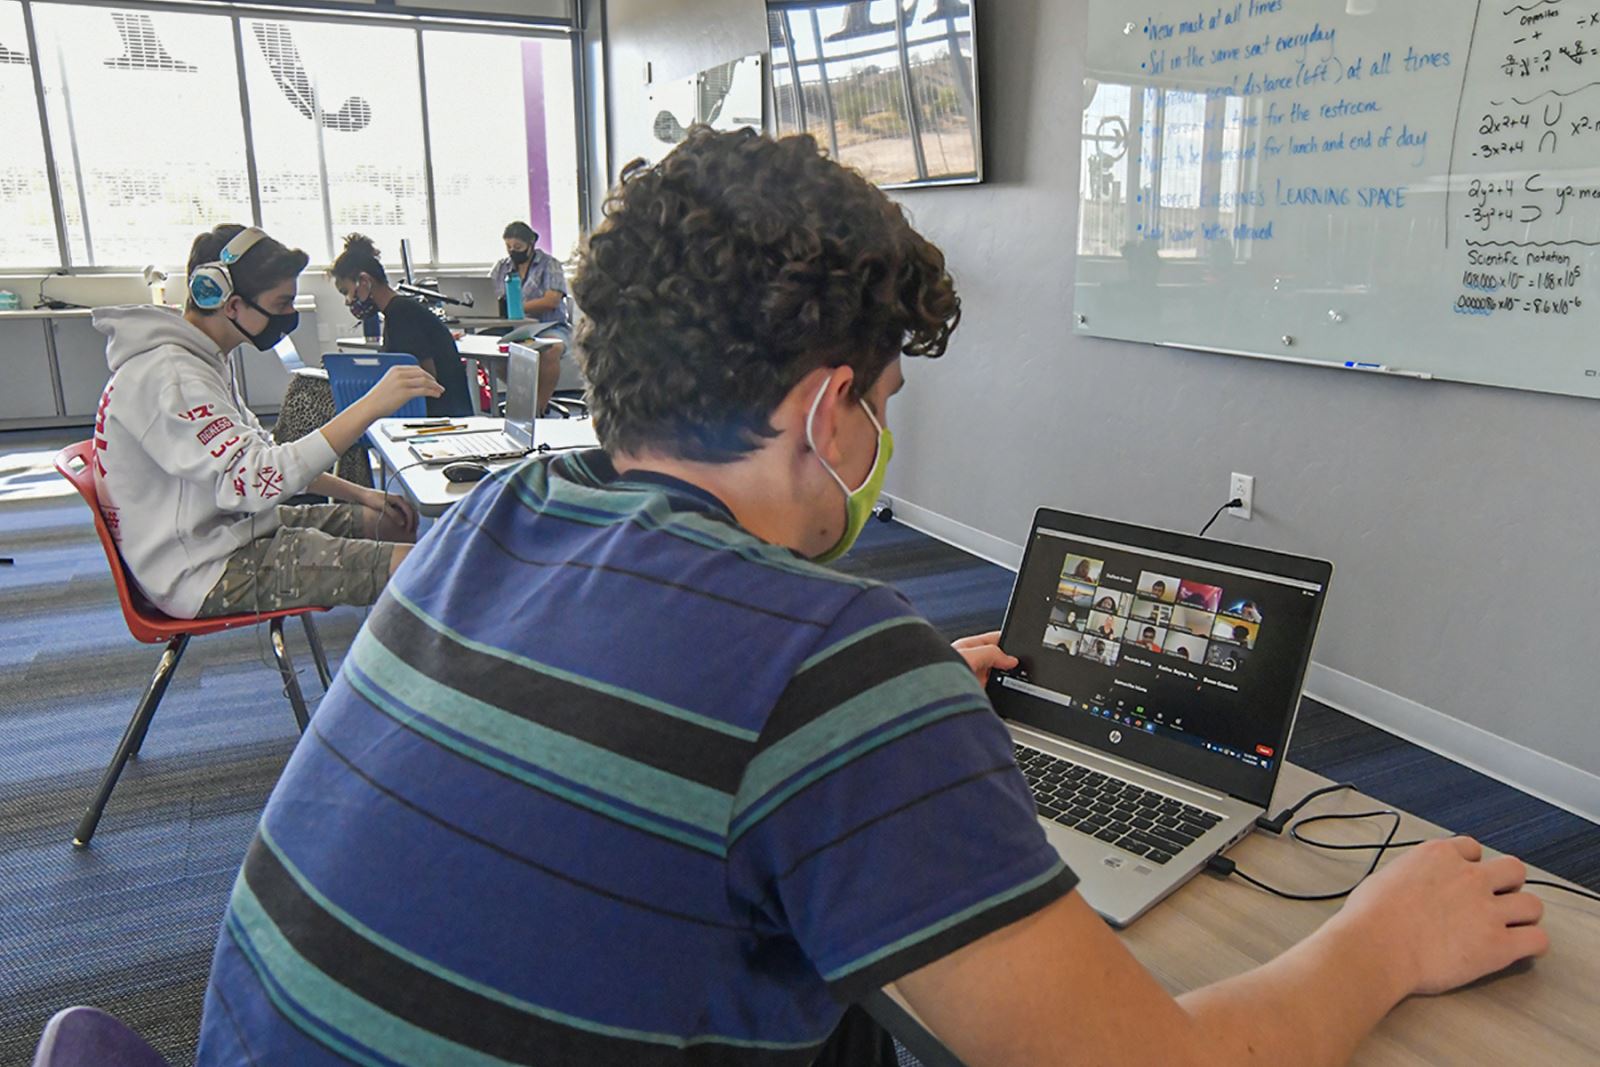 Students at work in learning space